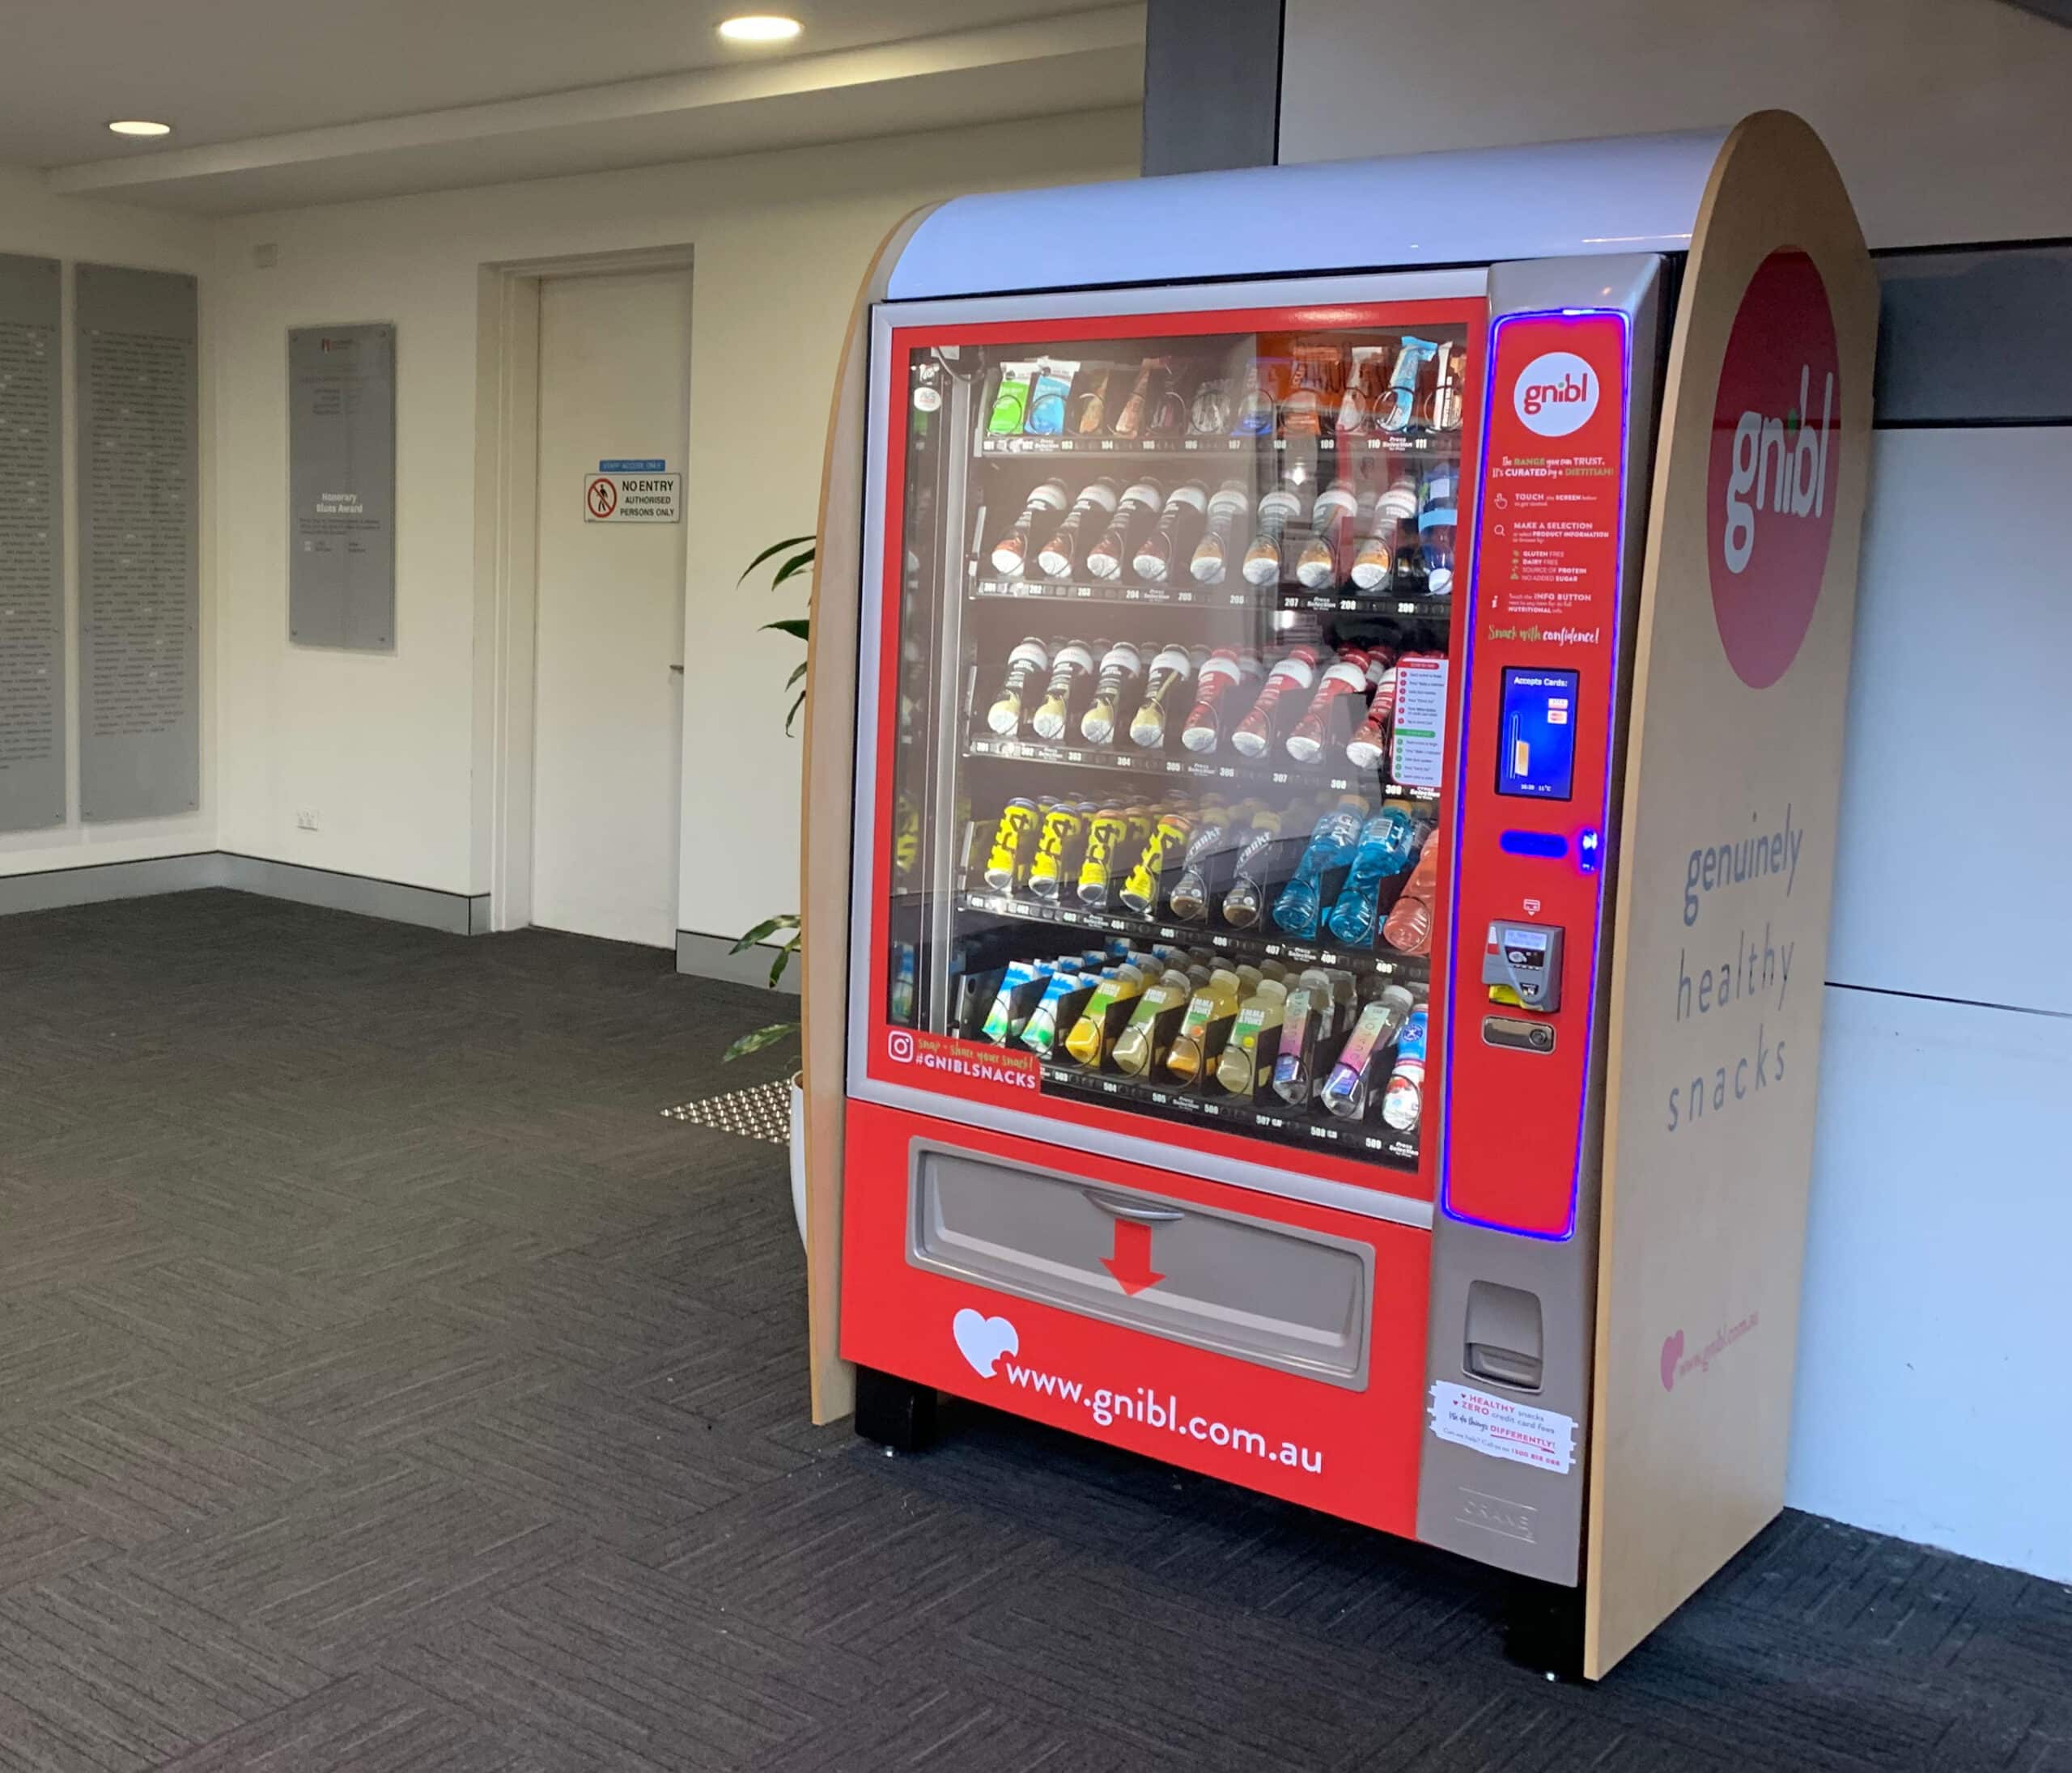 A Gnibl combination vending machine stocked with healthy snack and drink options.